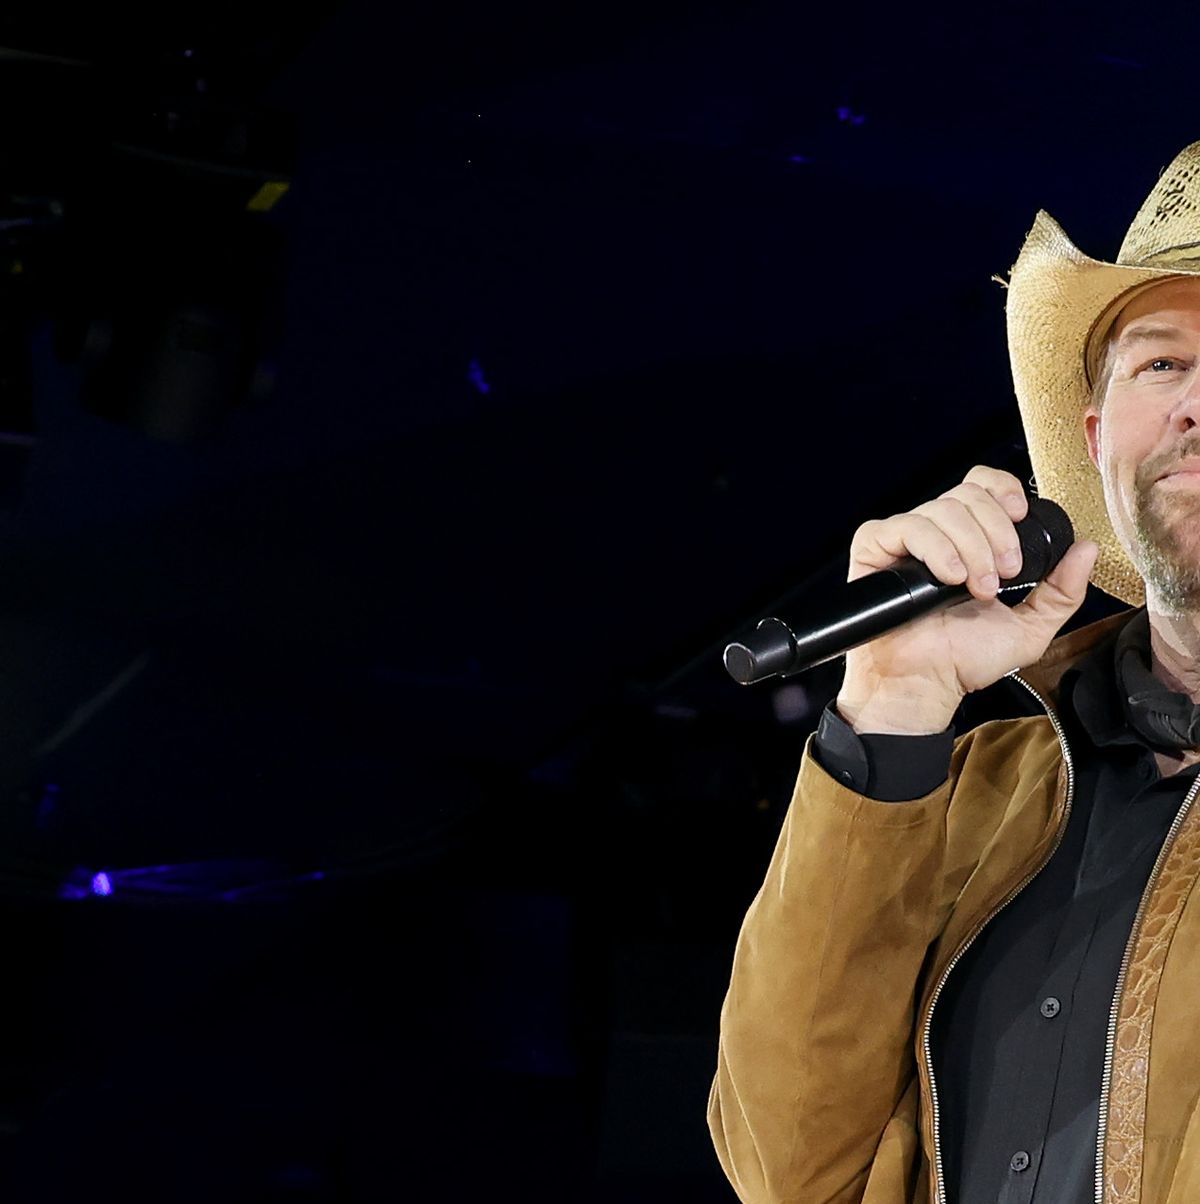 Toby Keith Takes the Stage for Phenomenal Performance